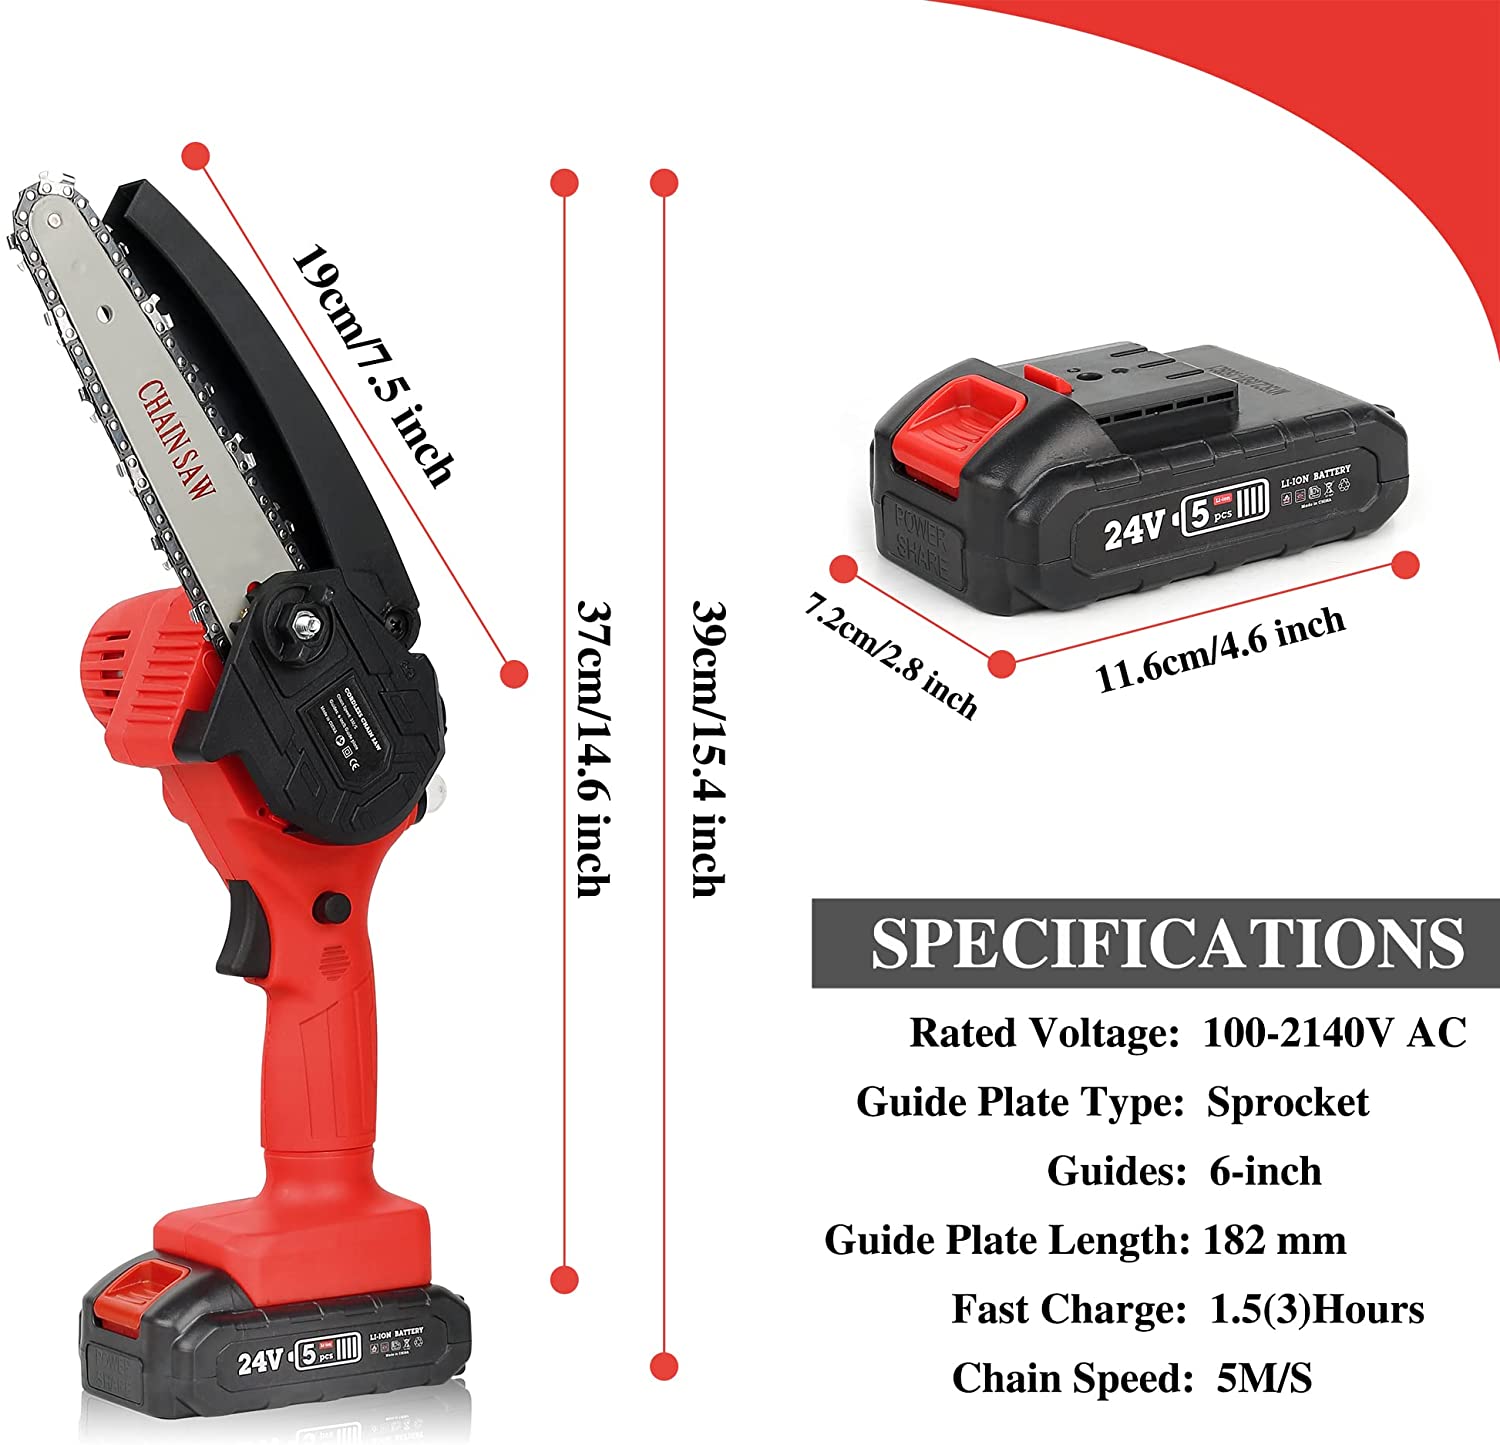 Mini Chainsaw 6-Inch Electric Cordless Chainsaw with 2 Chains